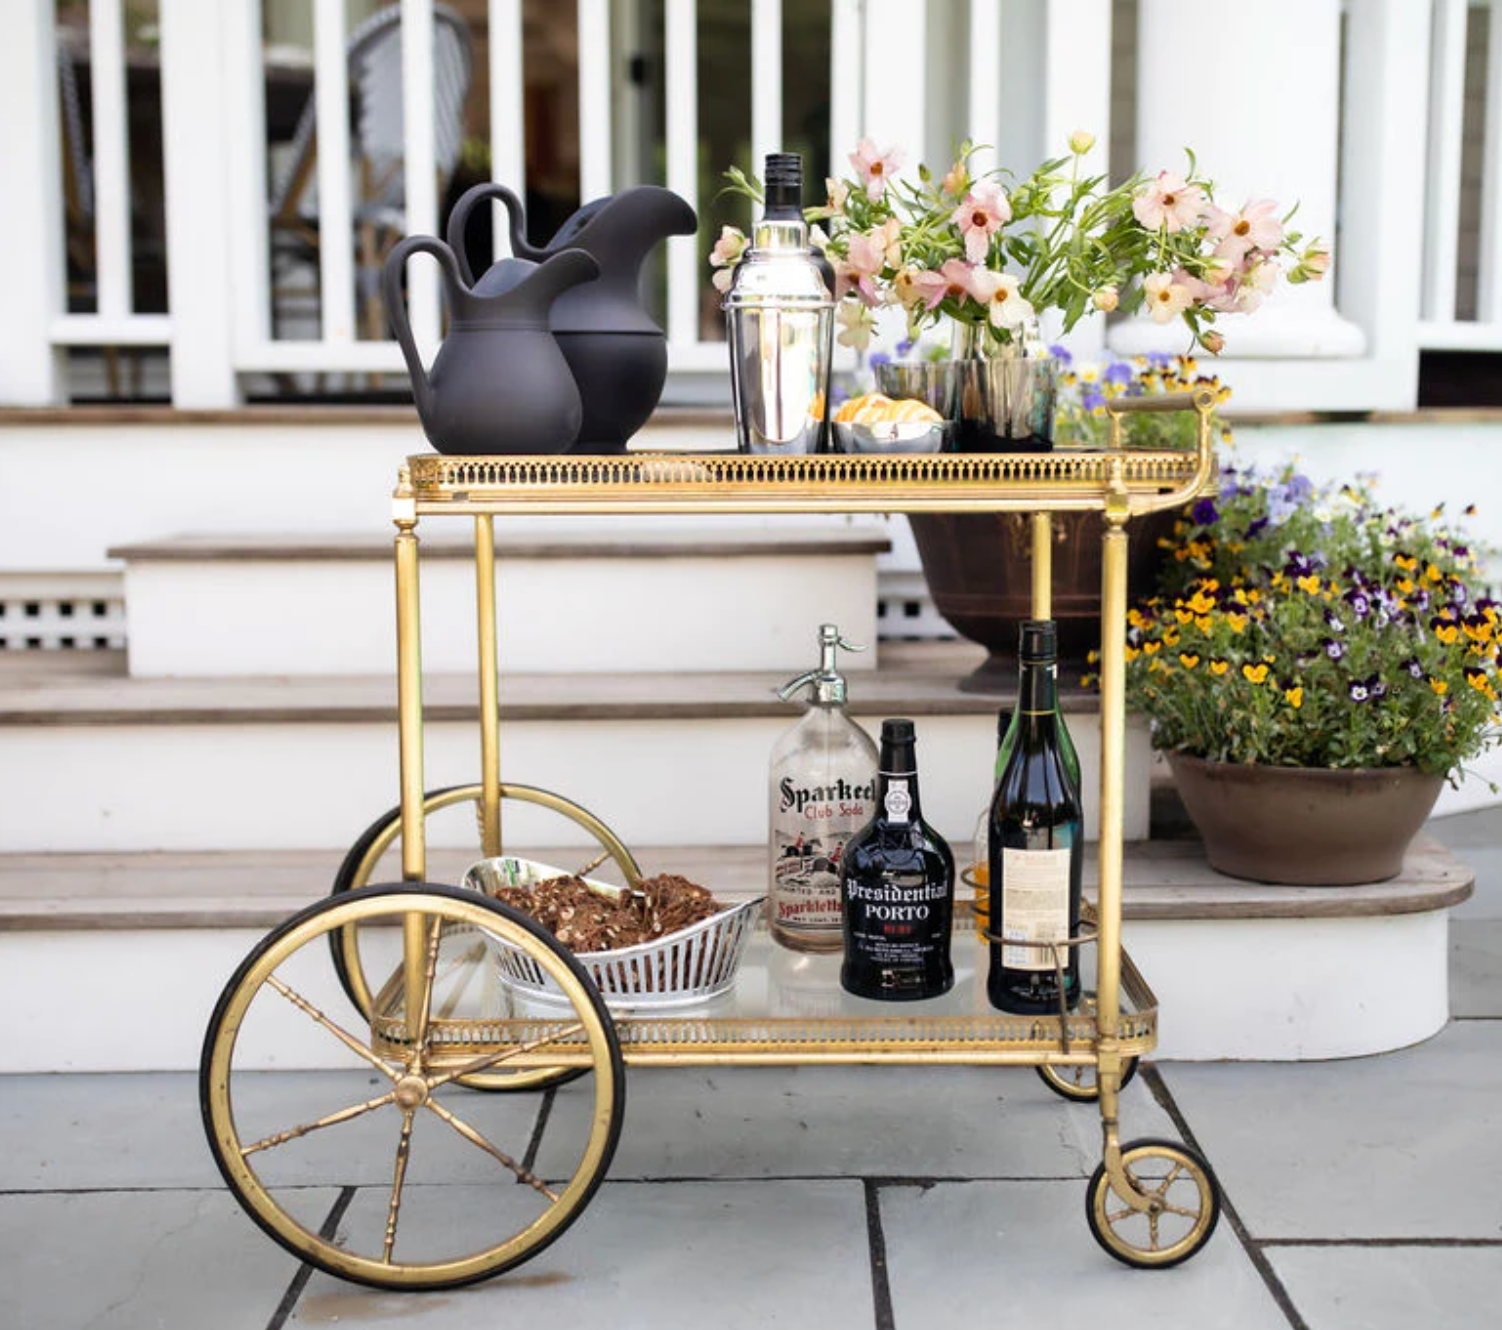 Bar cart - up your game, baby!